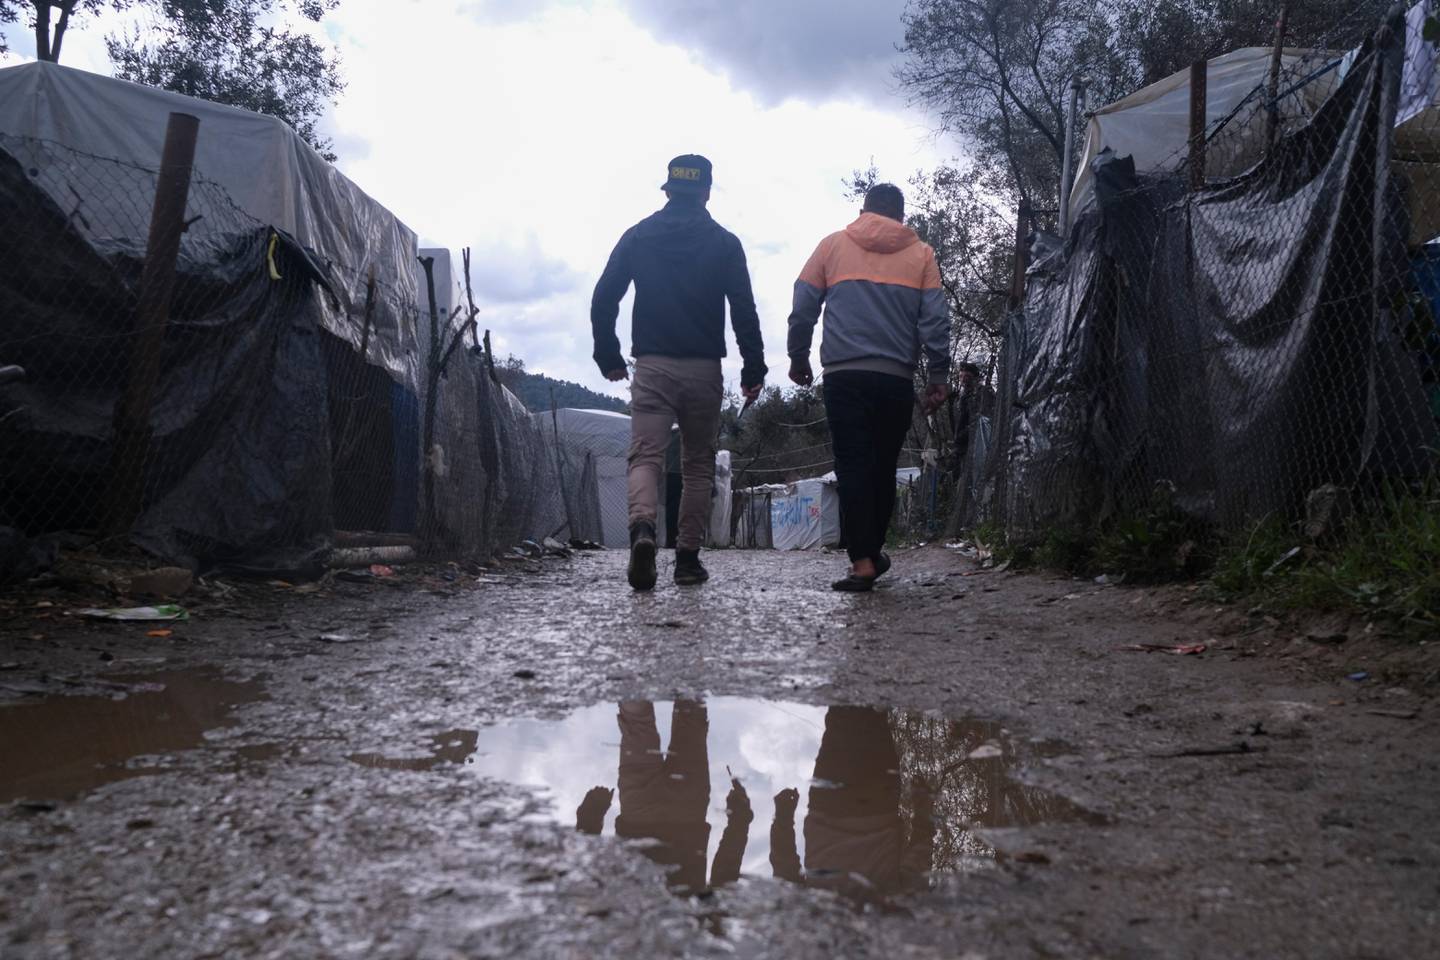 Migrants walk past makeshift tents outside the perimeter of the overcrowded Moria refugee camp on the northeastern Aegean island of Lesbos, Greece, Wednesday, March 11, 2020. Camps on Lesbos and other islands of the eastern Aegean are already overcrowded and operating above their capacity. (AP Photo/Aggelos Barai)